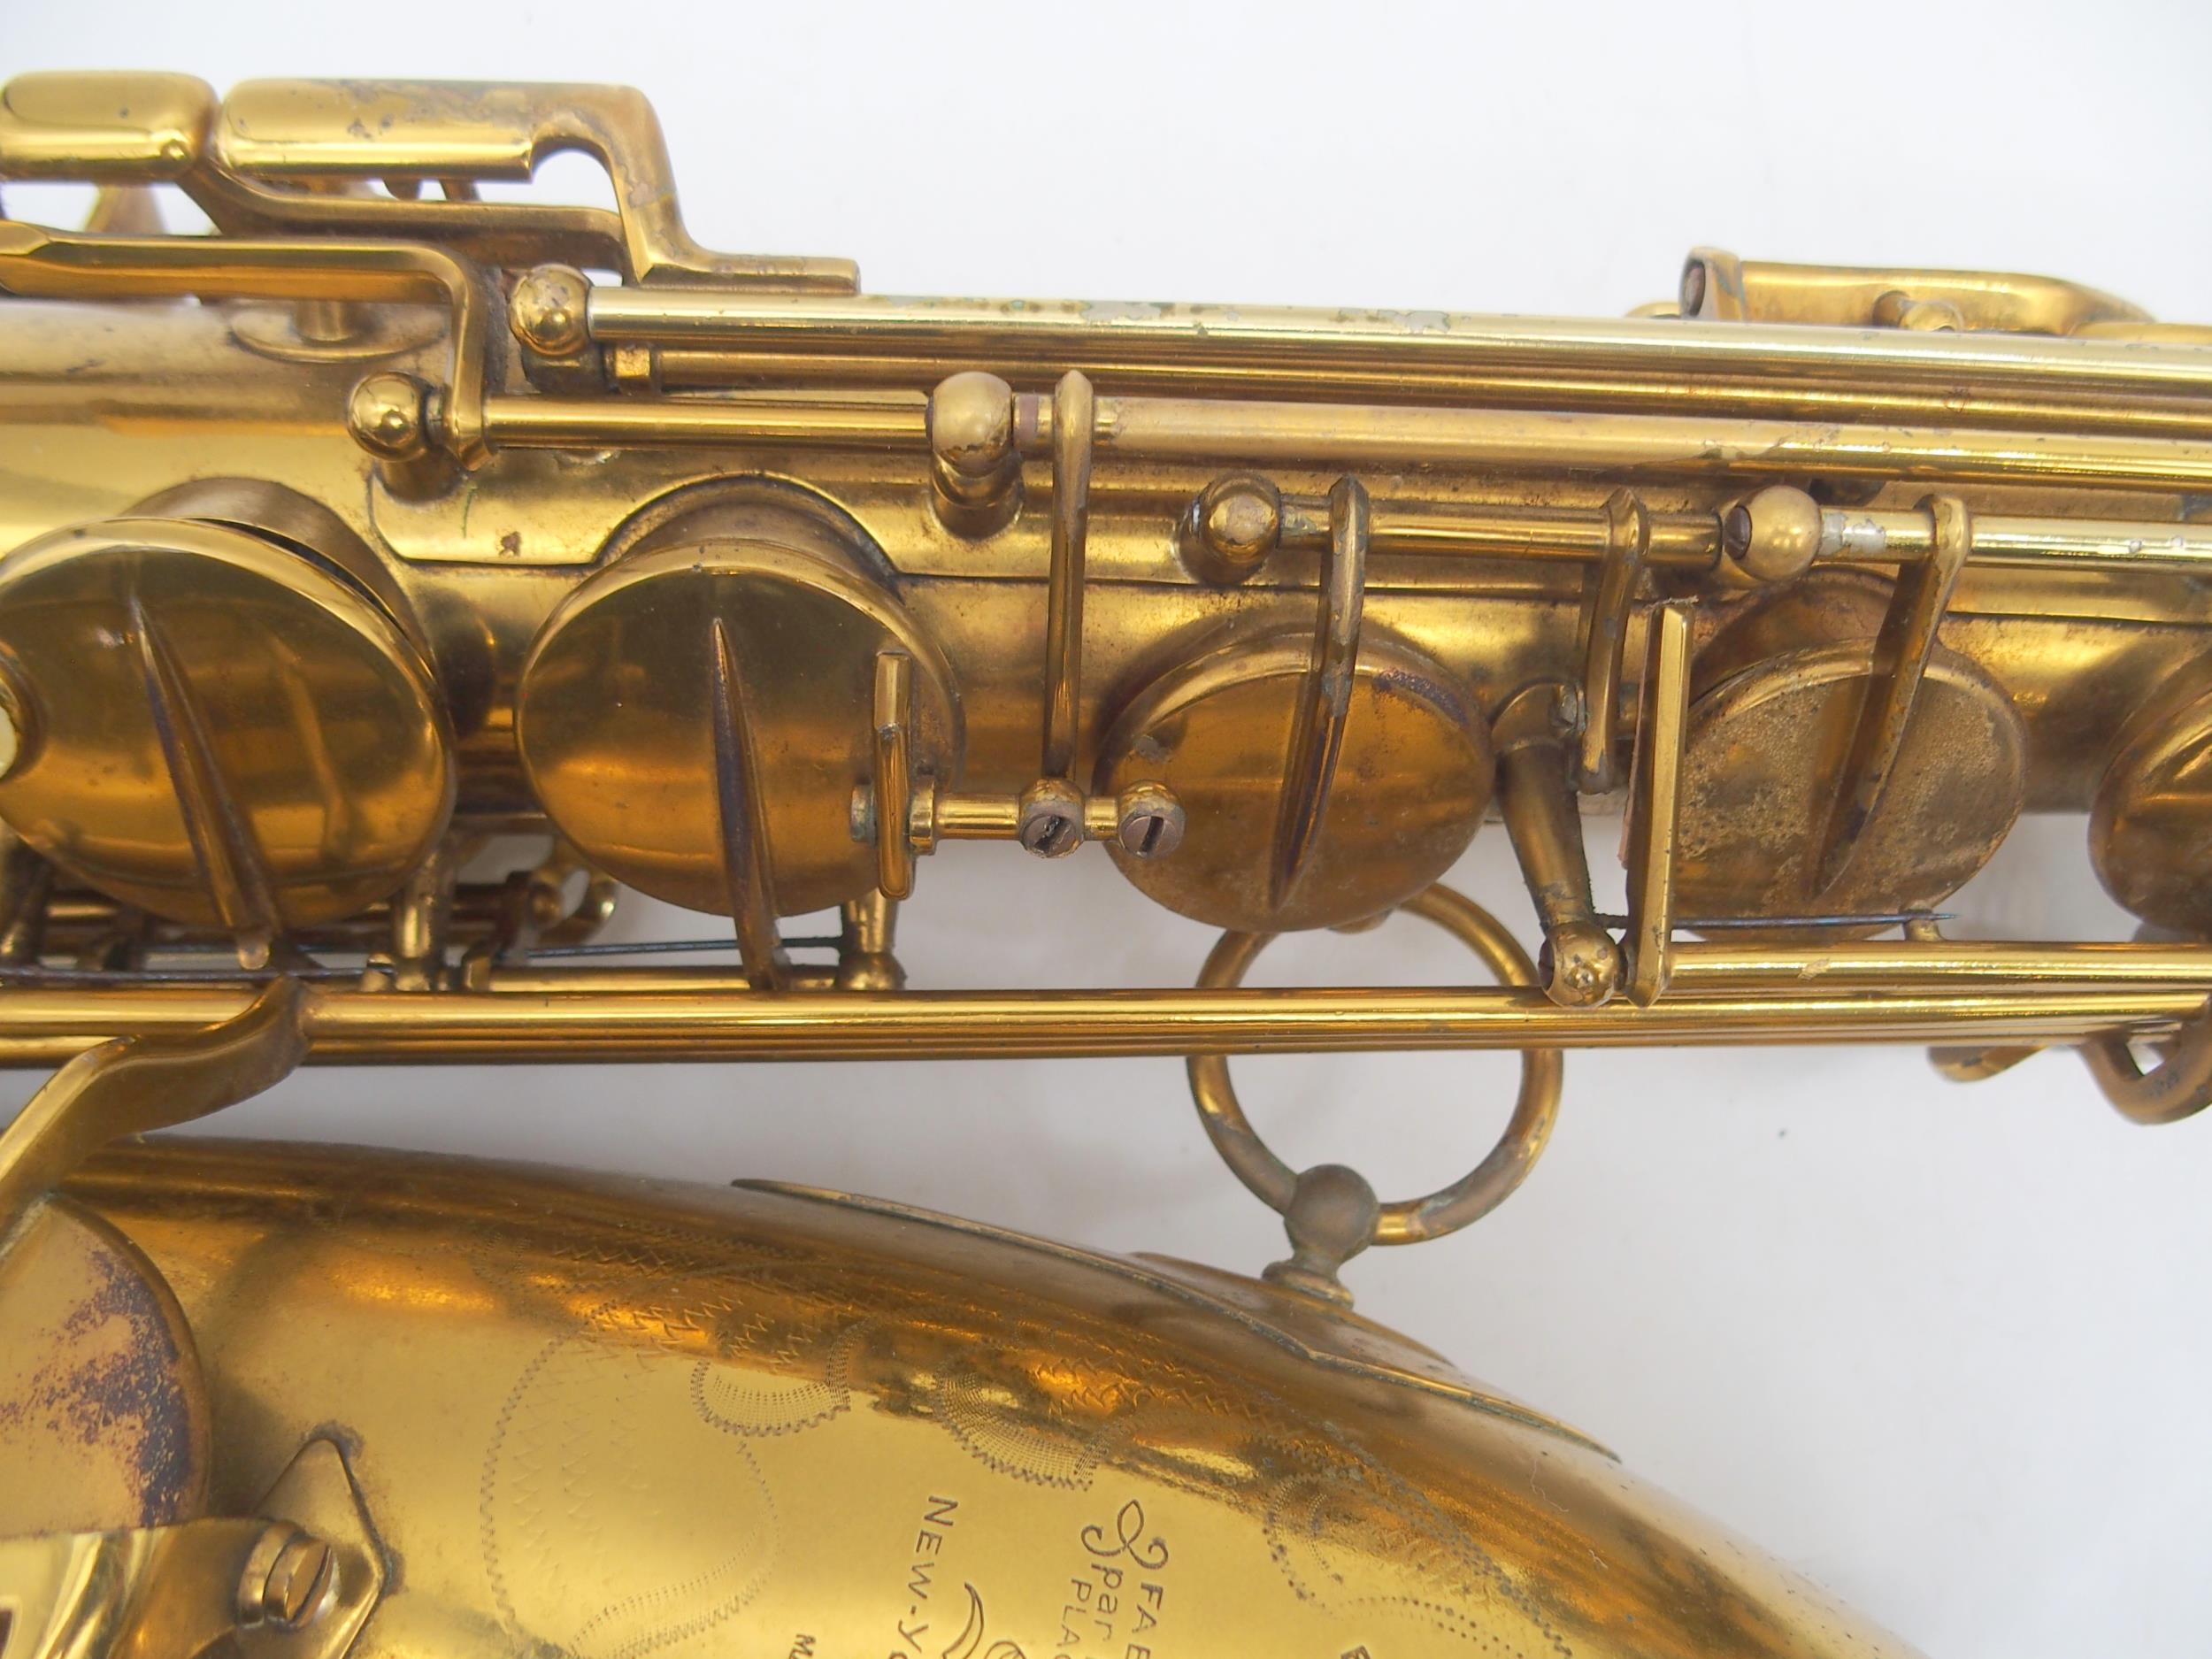 **WITHDRAWN** Pennsylvania Special Baritone Saxophone serial number 261180 engraved "Pensyl - Image 22 of 33